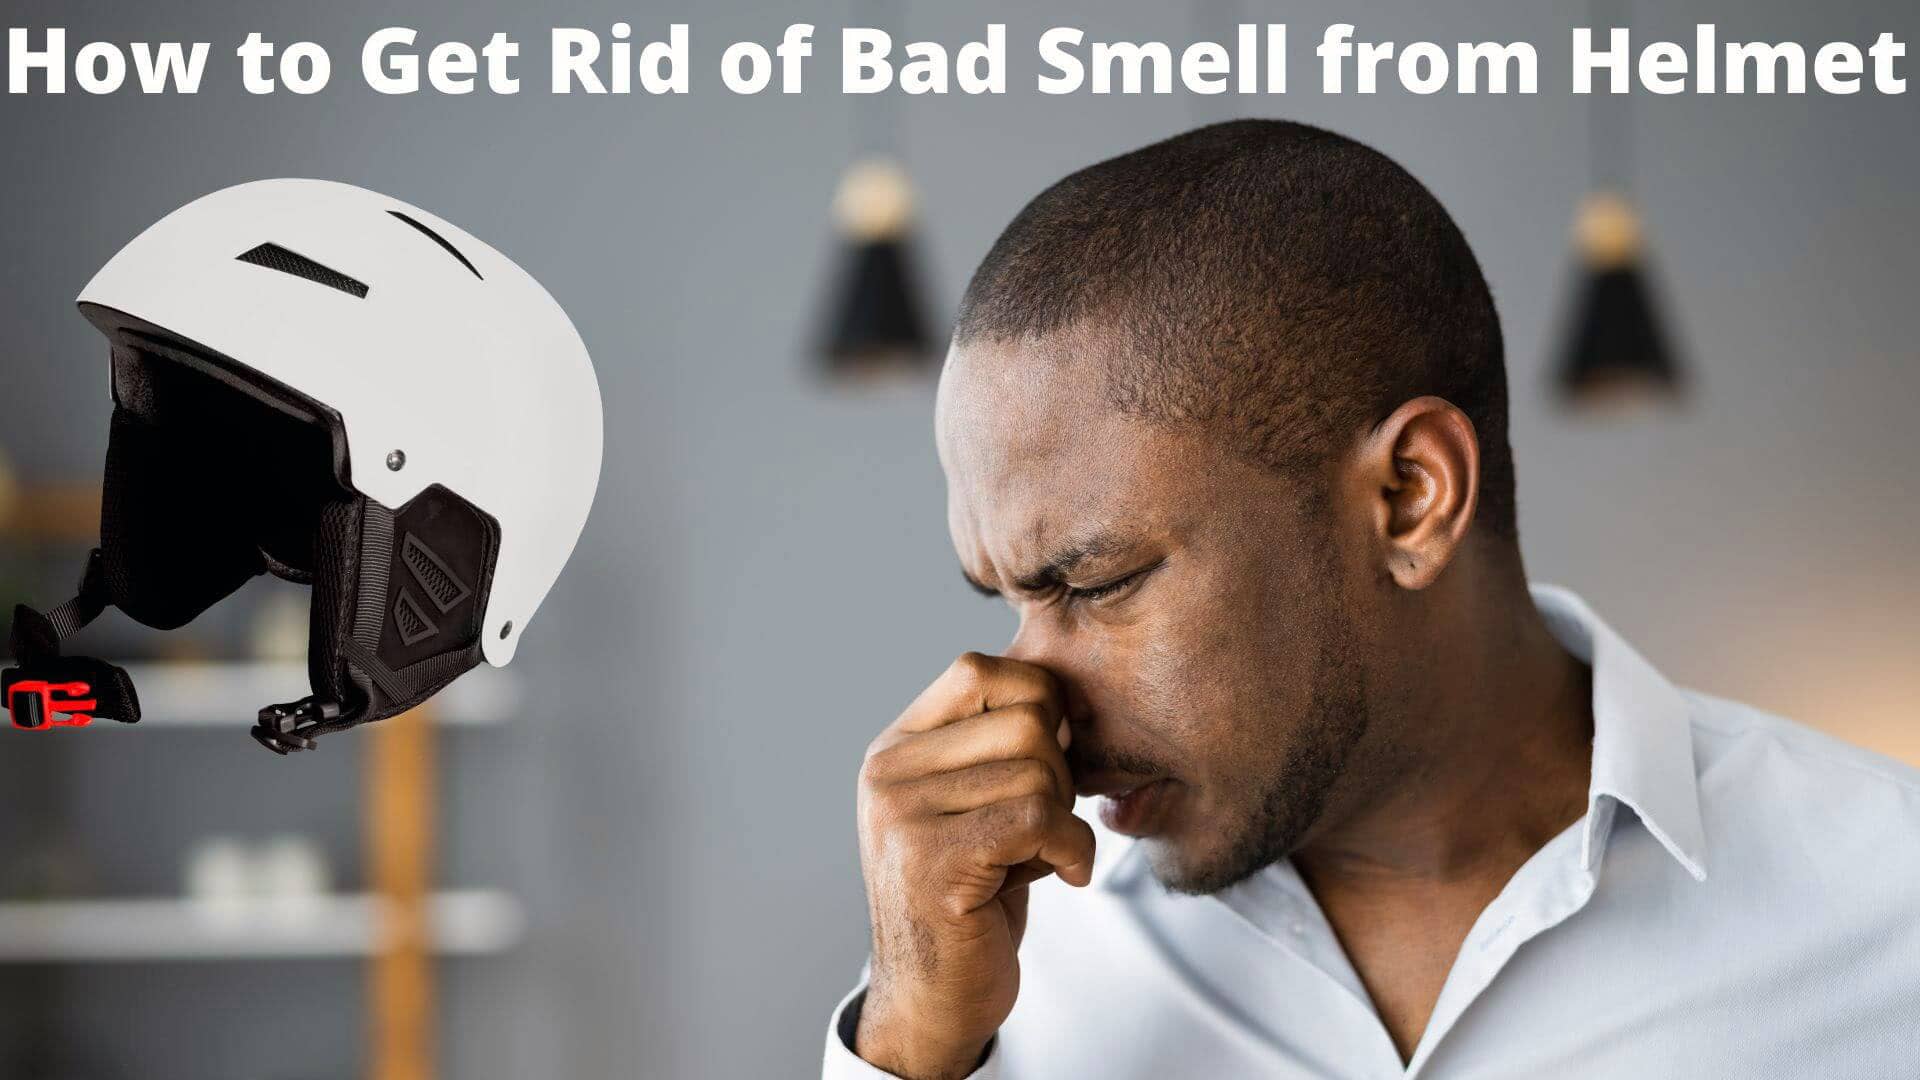 How to Get Rid of Bad Smell from Helmet